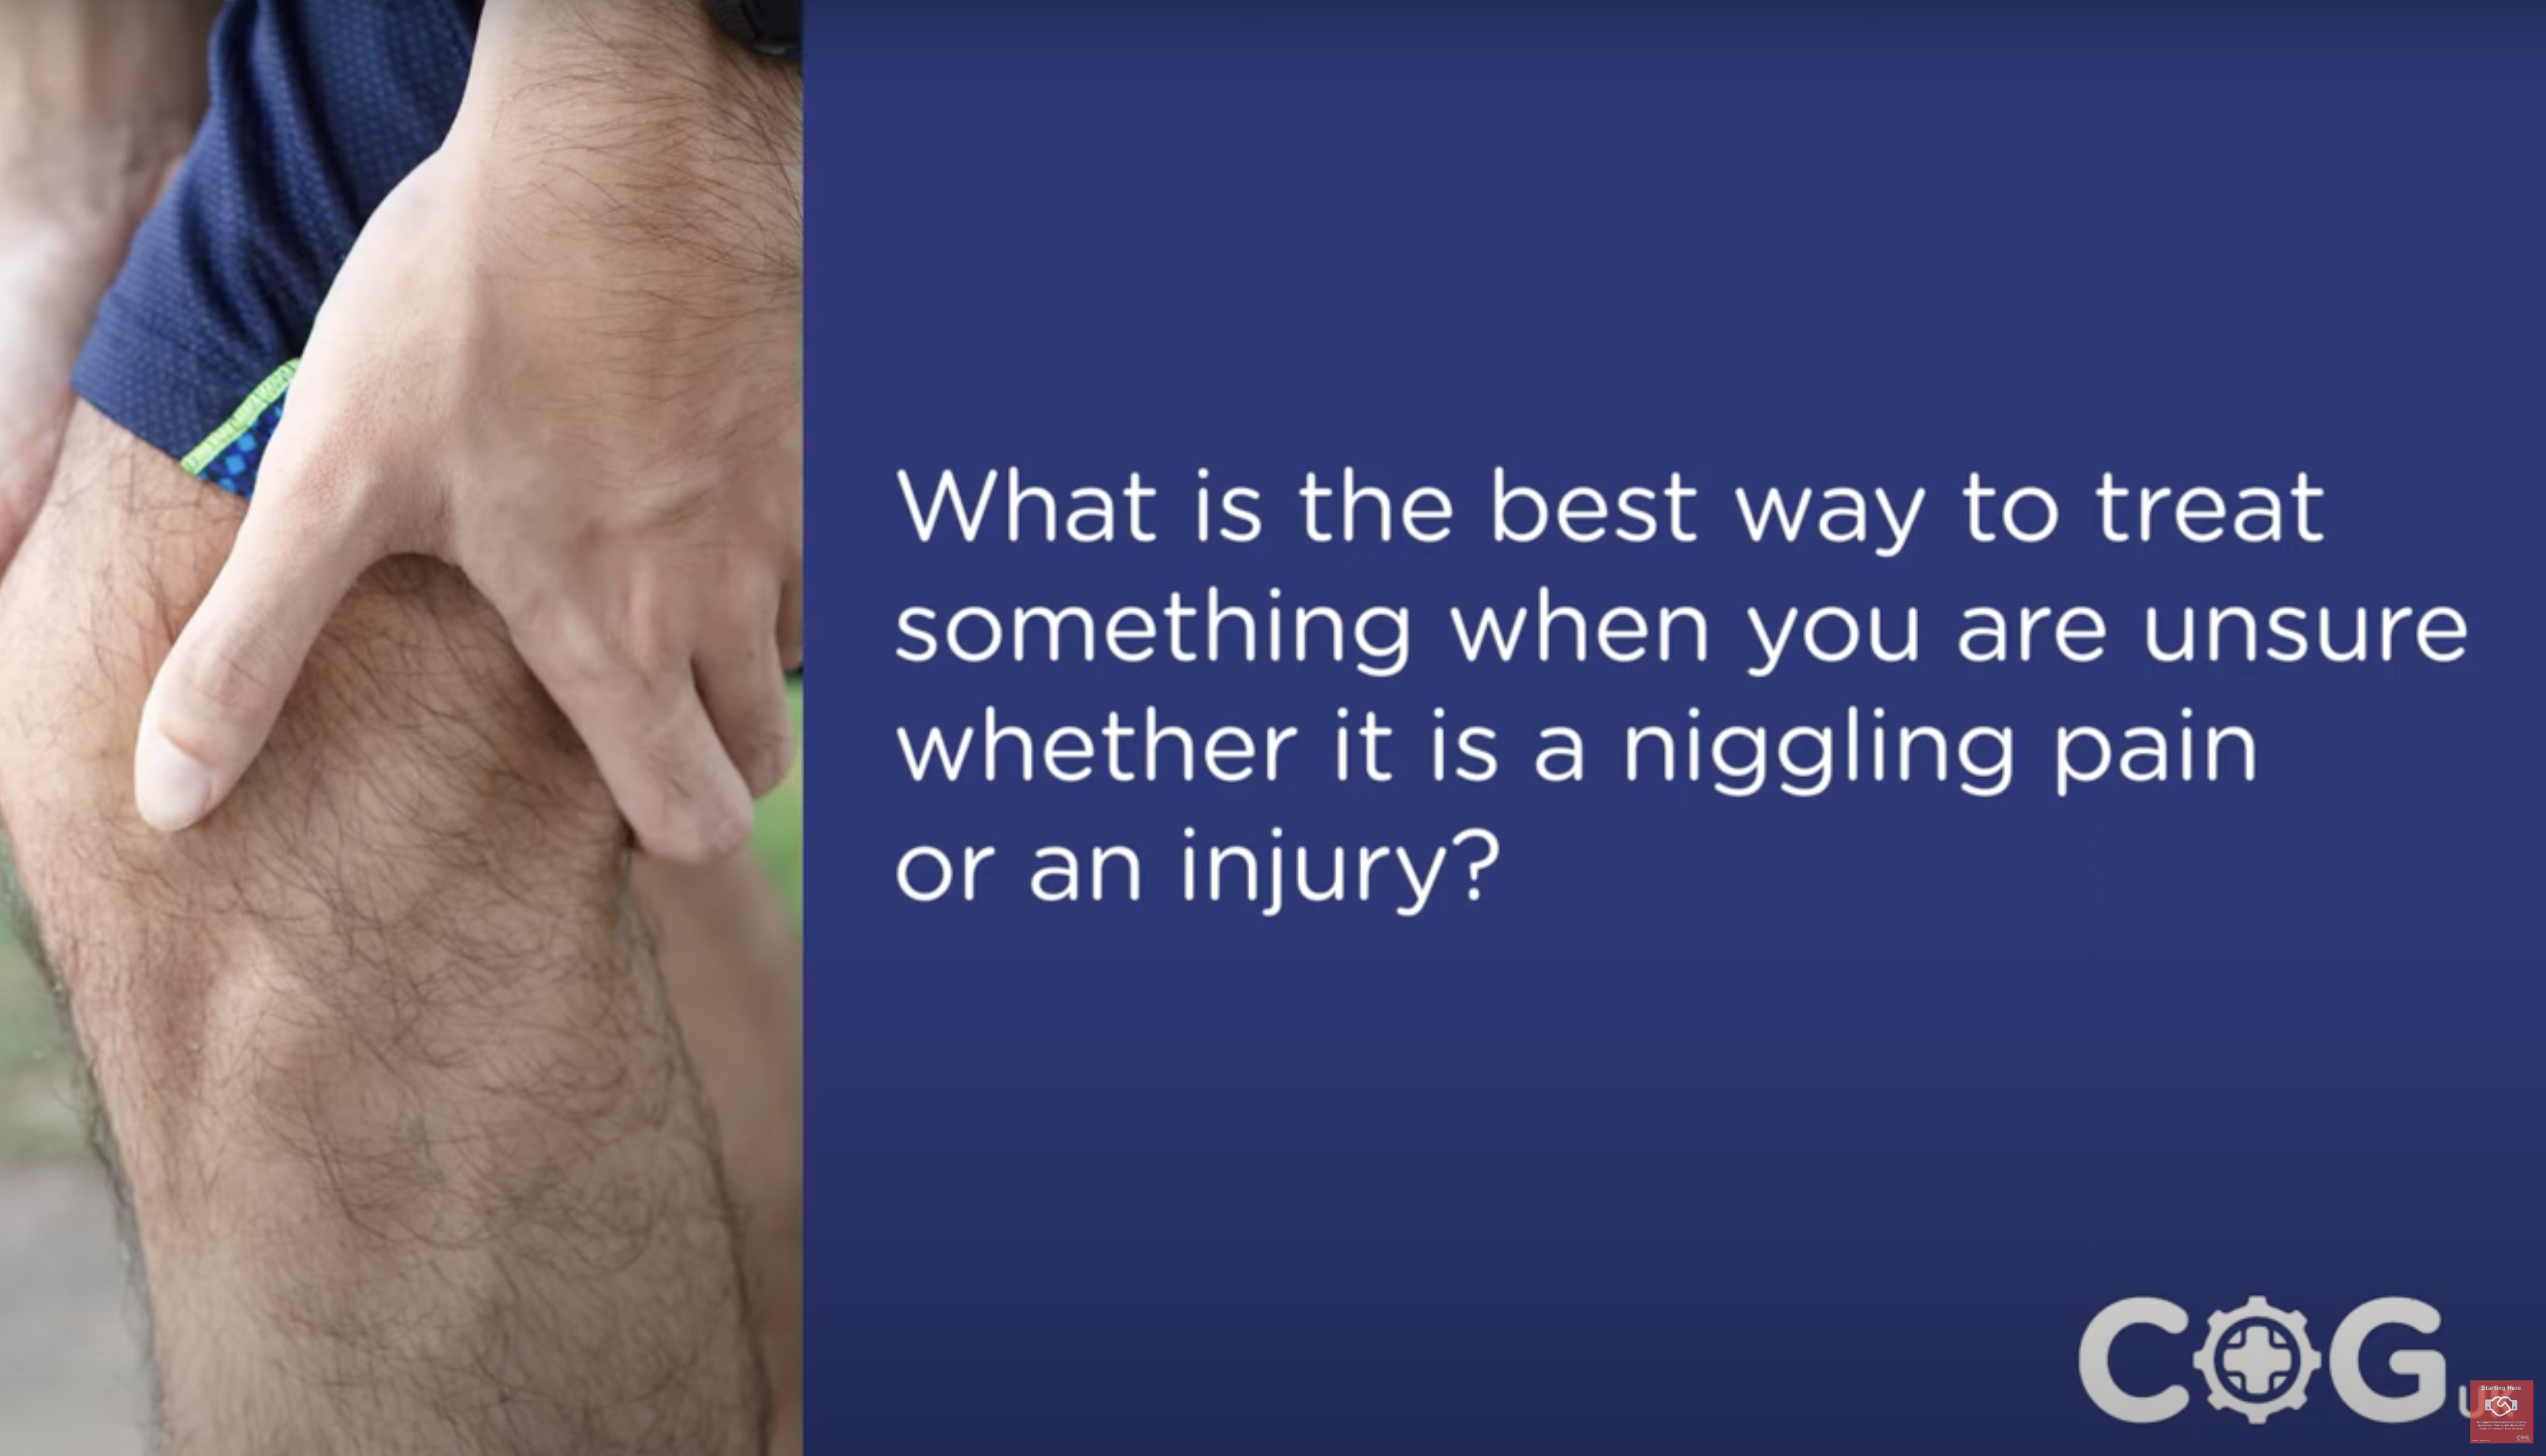 What Is The Best Way To Treat Something When Unsure If It Is A Niggling Pain Or Injury Body Back Up Blog